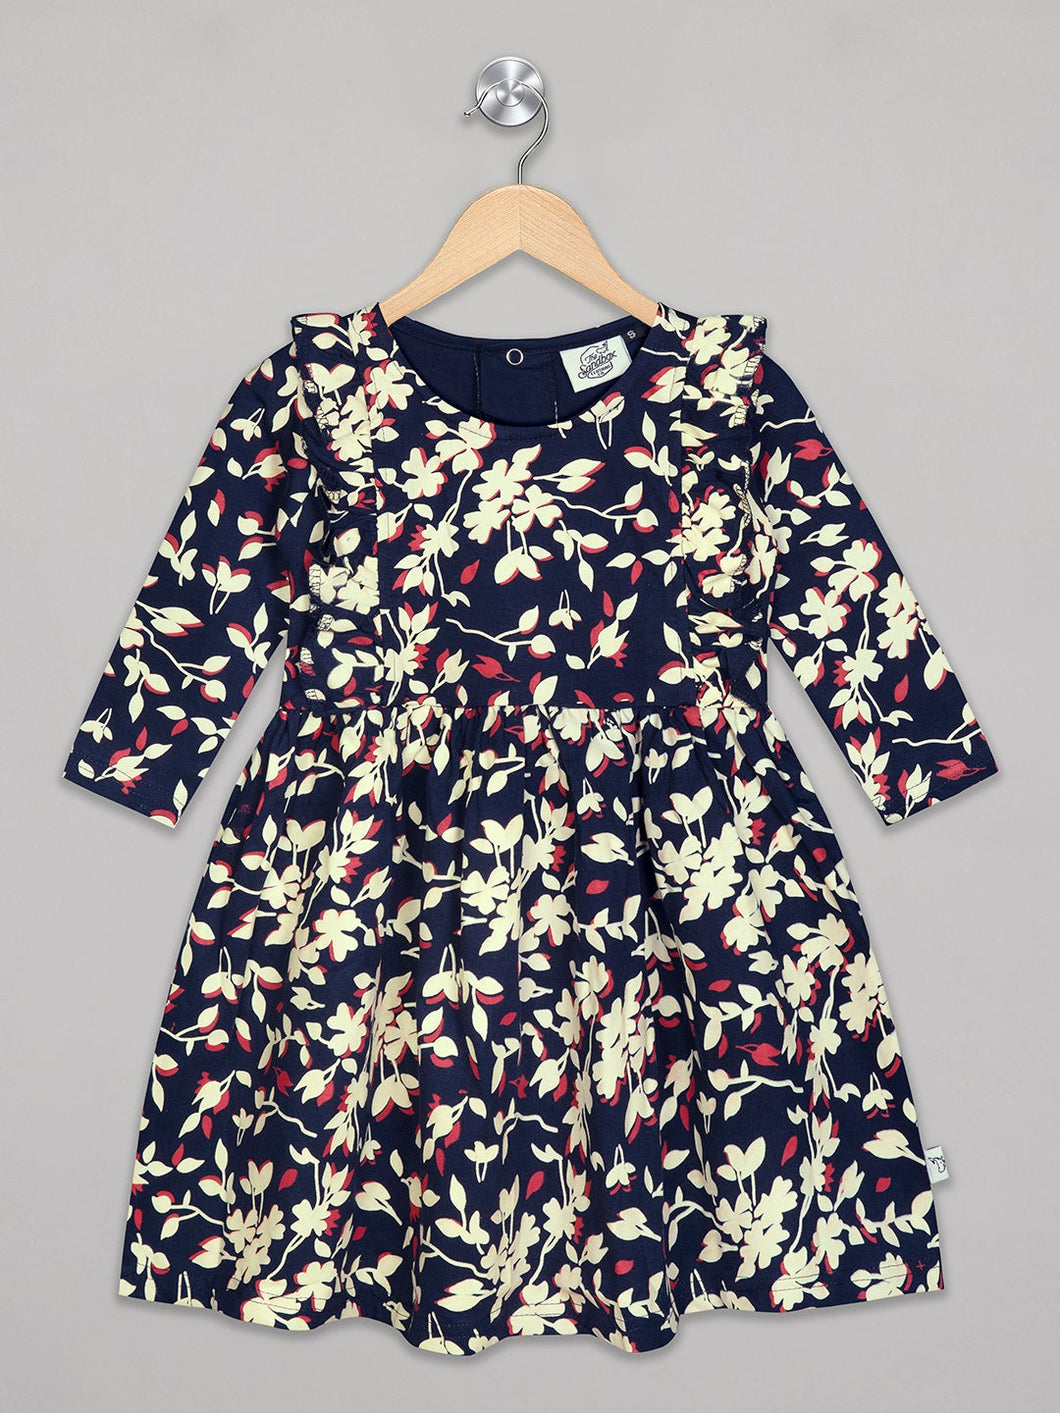 Round neck 3/4th sleeves floral navy white and red knee length frock for girls